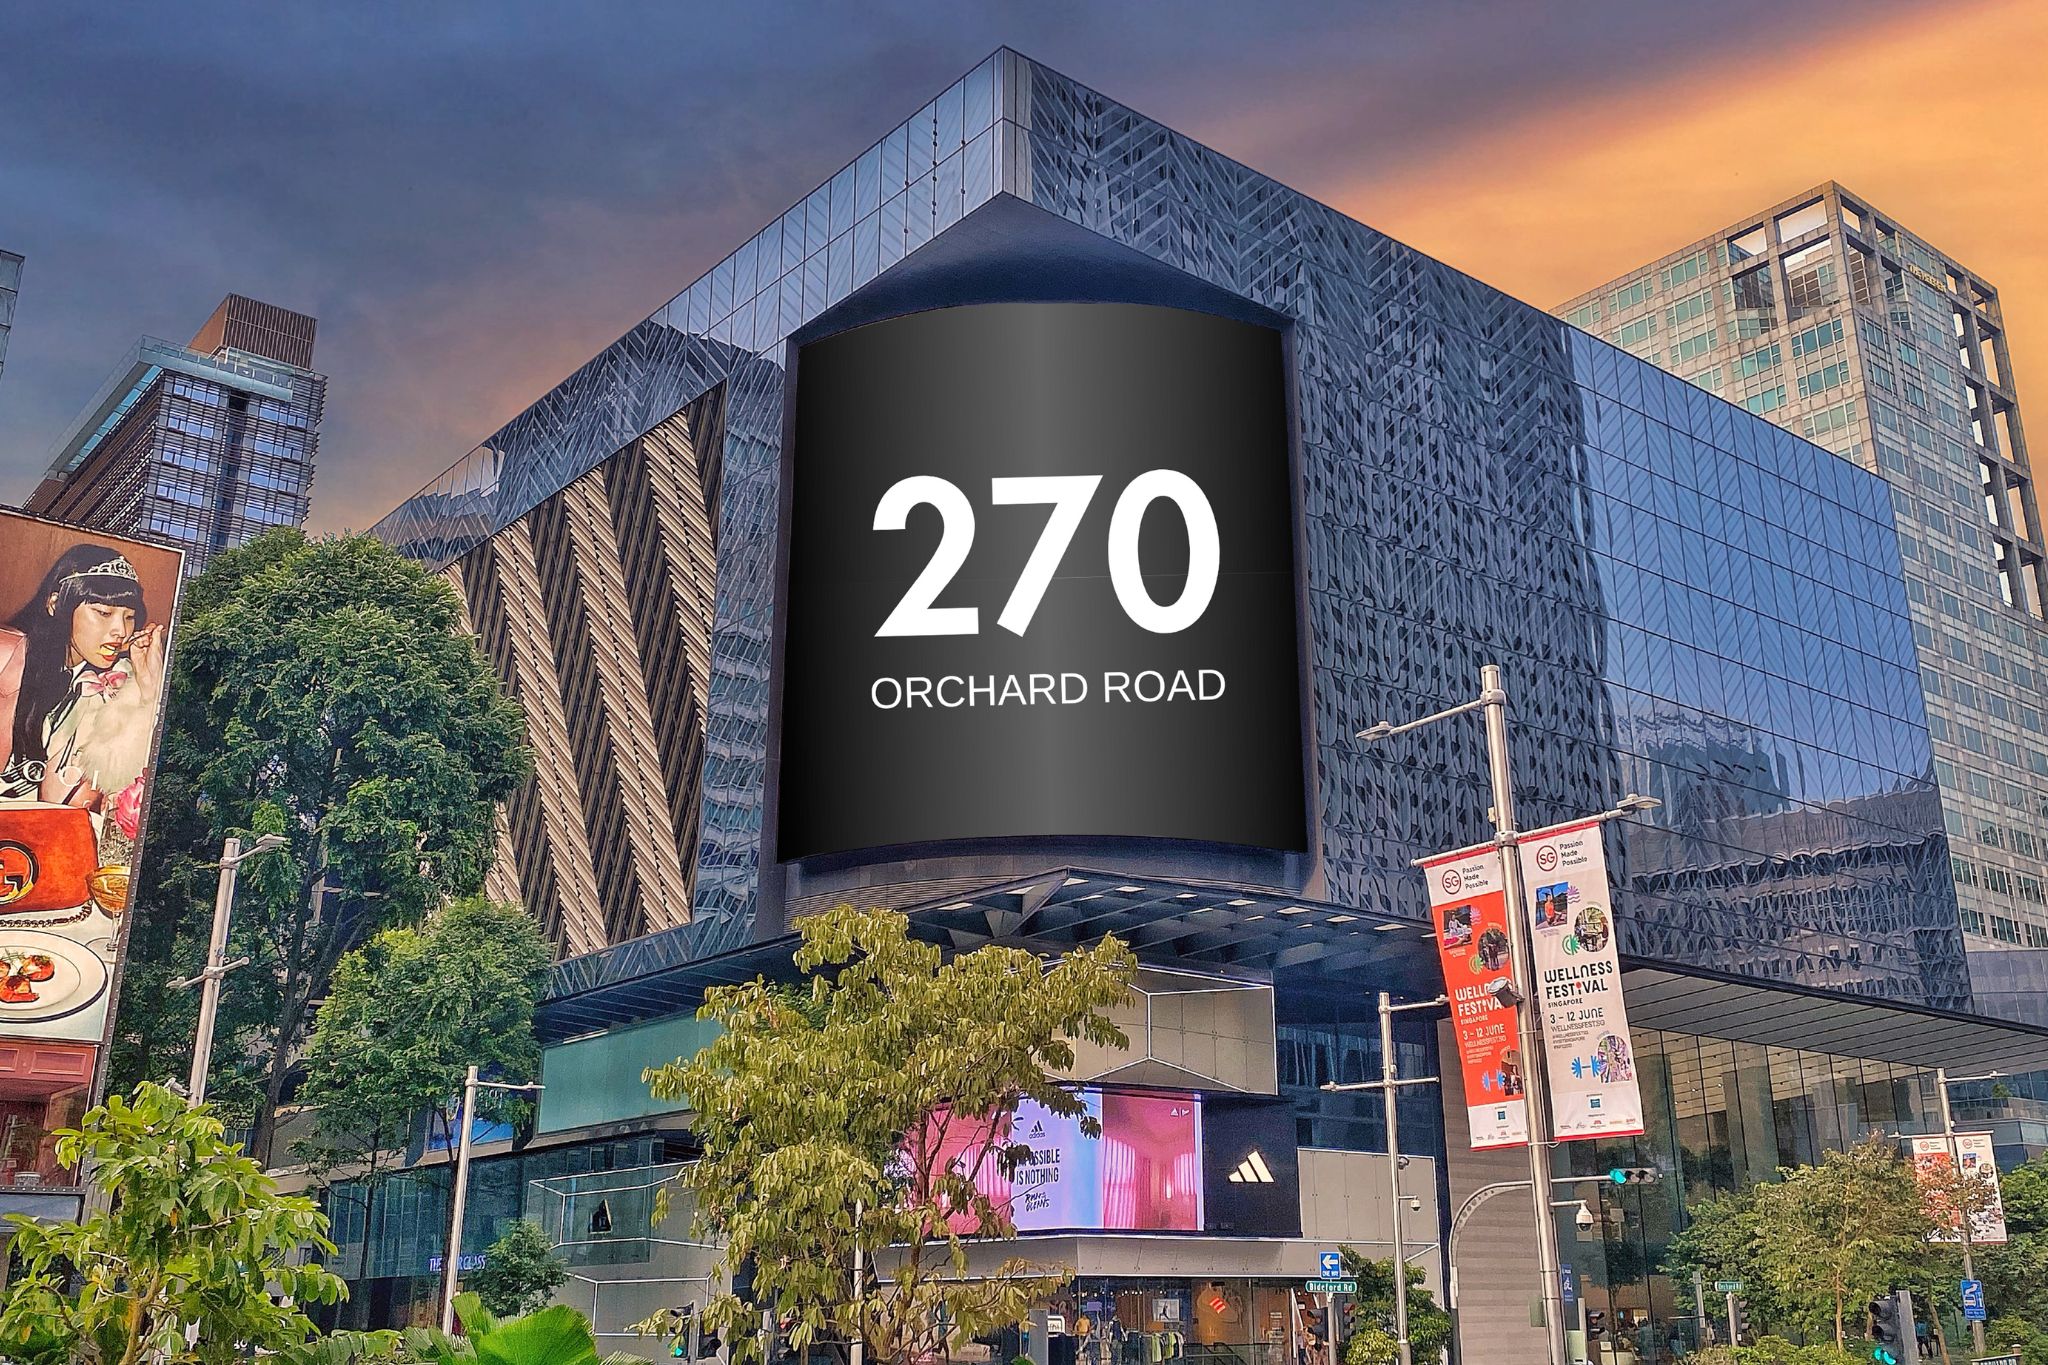 Who owns Orchard Road?